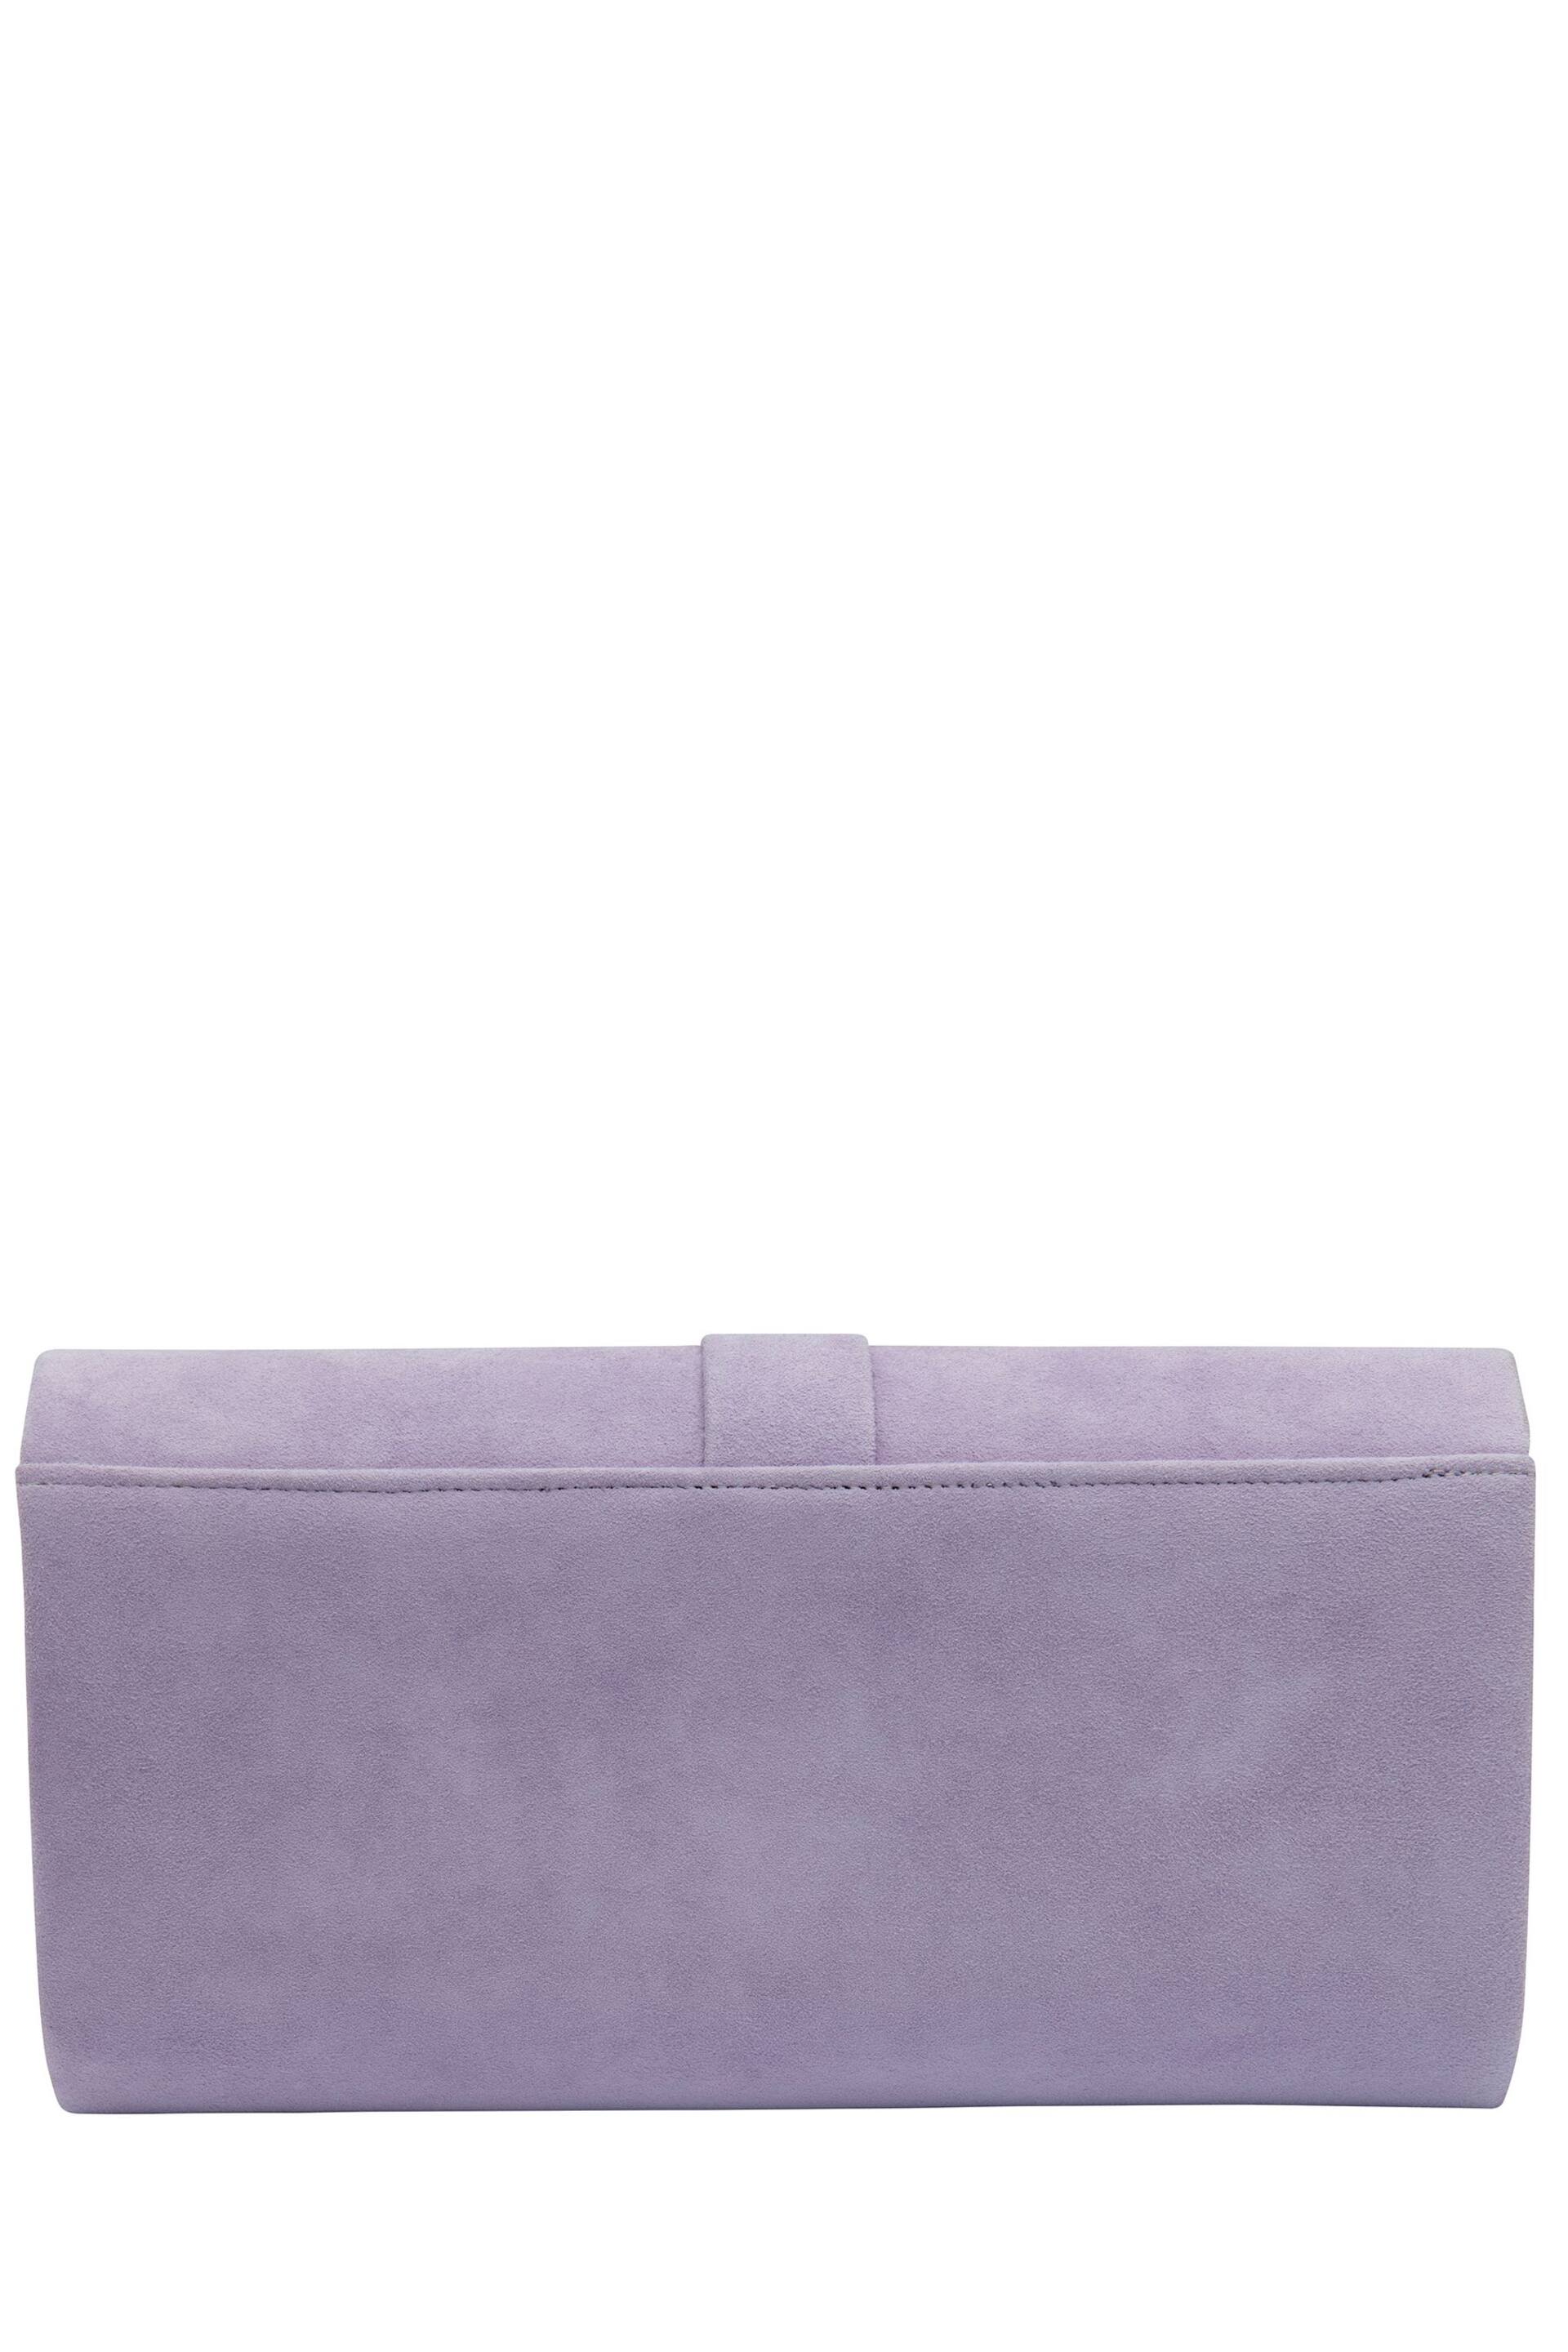 Lotus Purple Clutch Bag With Chain - Image 2 of 4